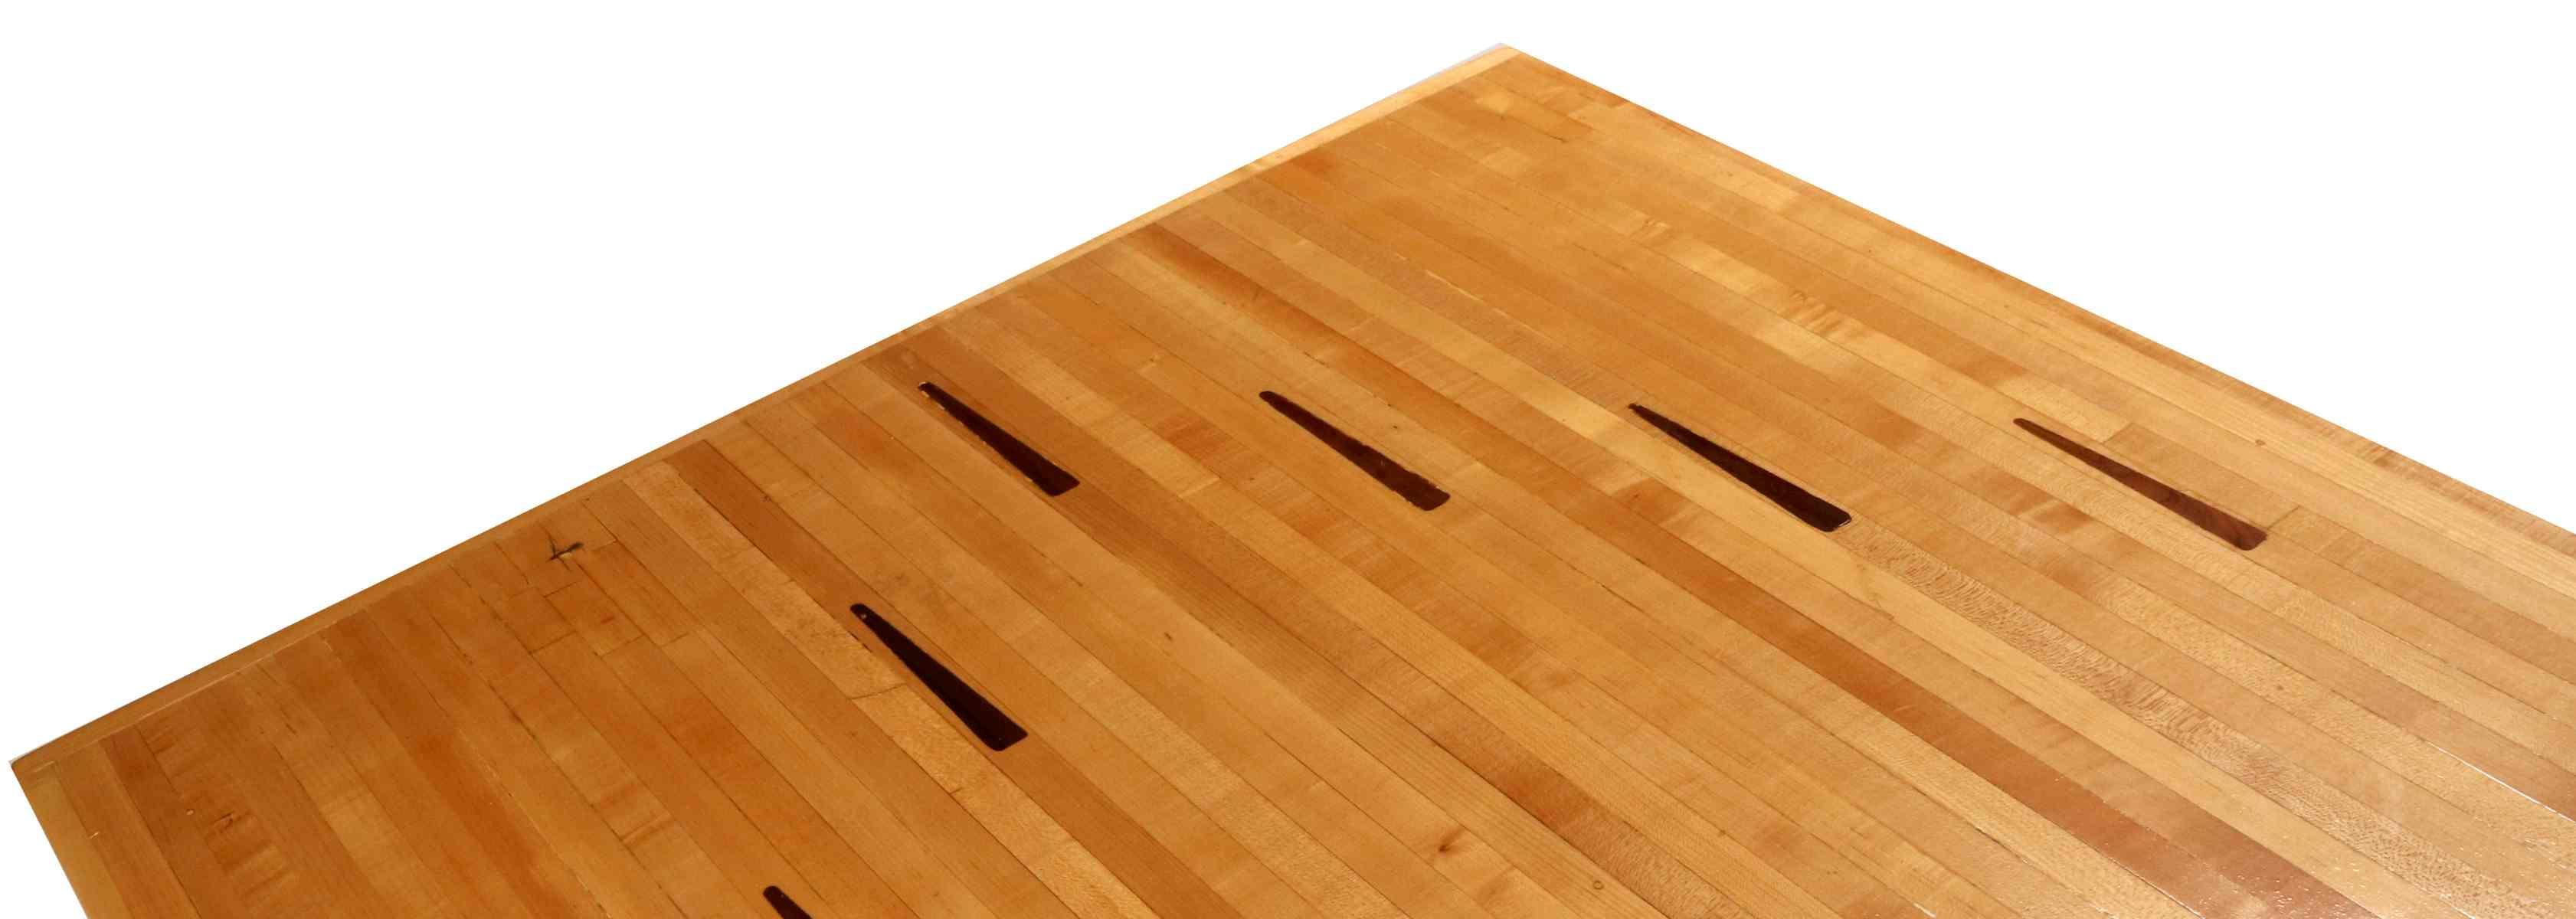 TABLE CRAFTED FROM KING LOUIS BOWLING ALLEY FLOOR